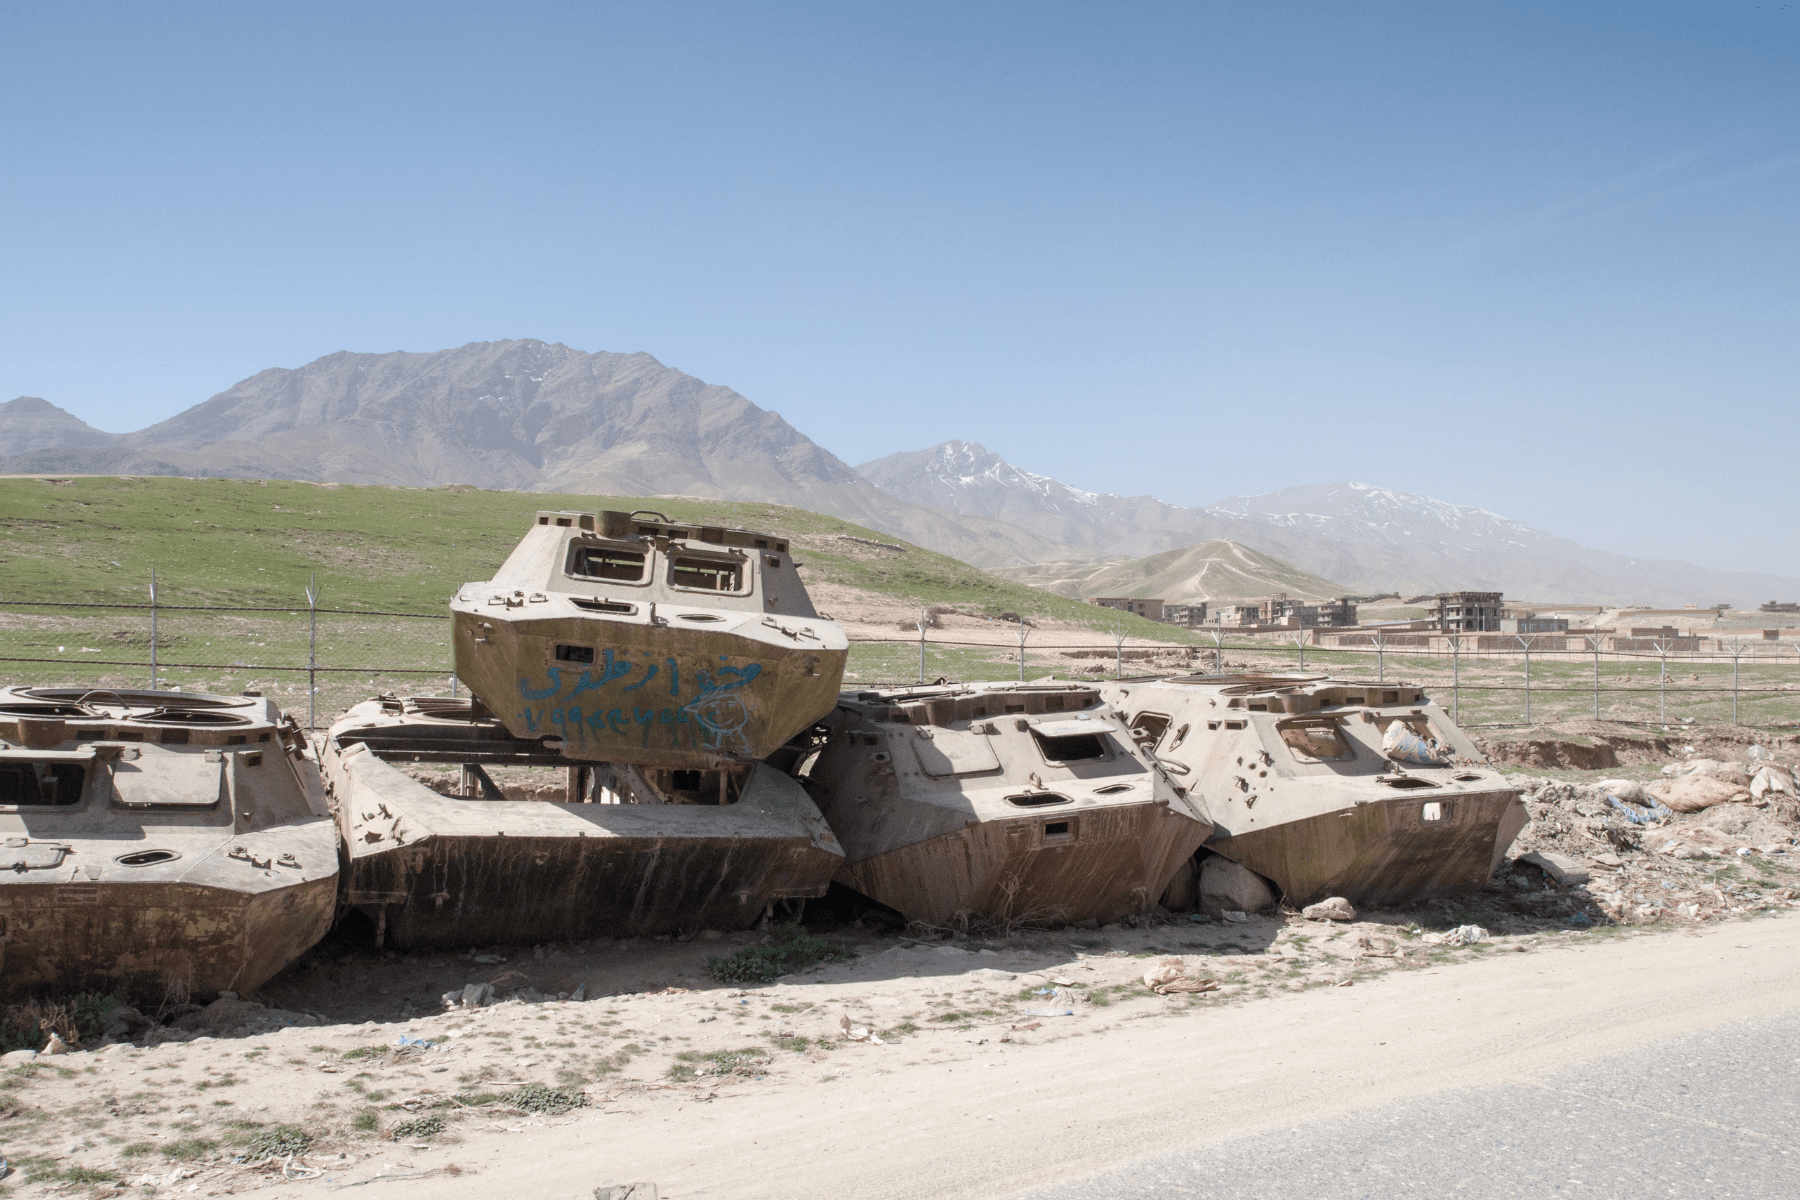 Images of war. Piles of tanks.